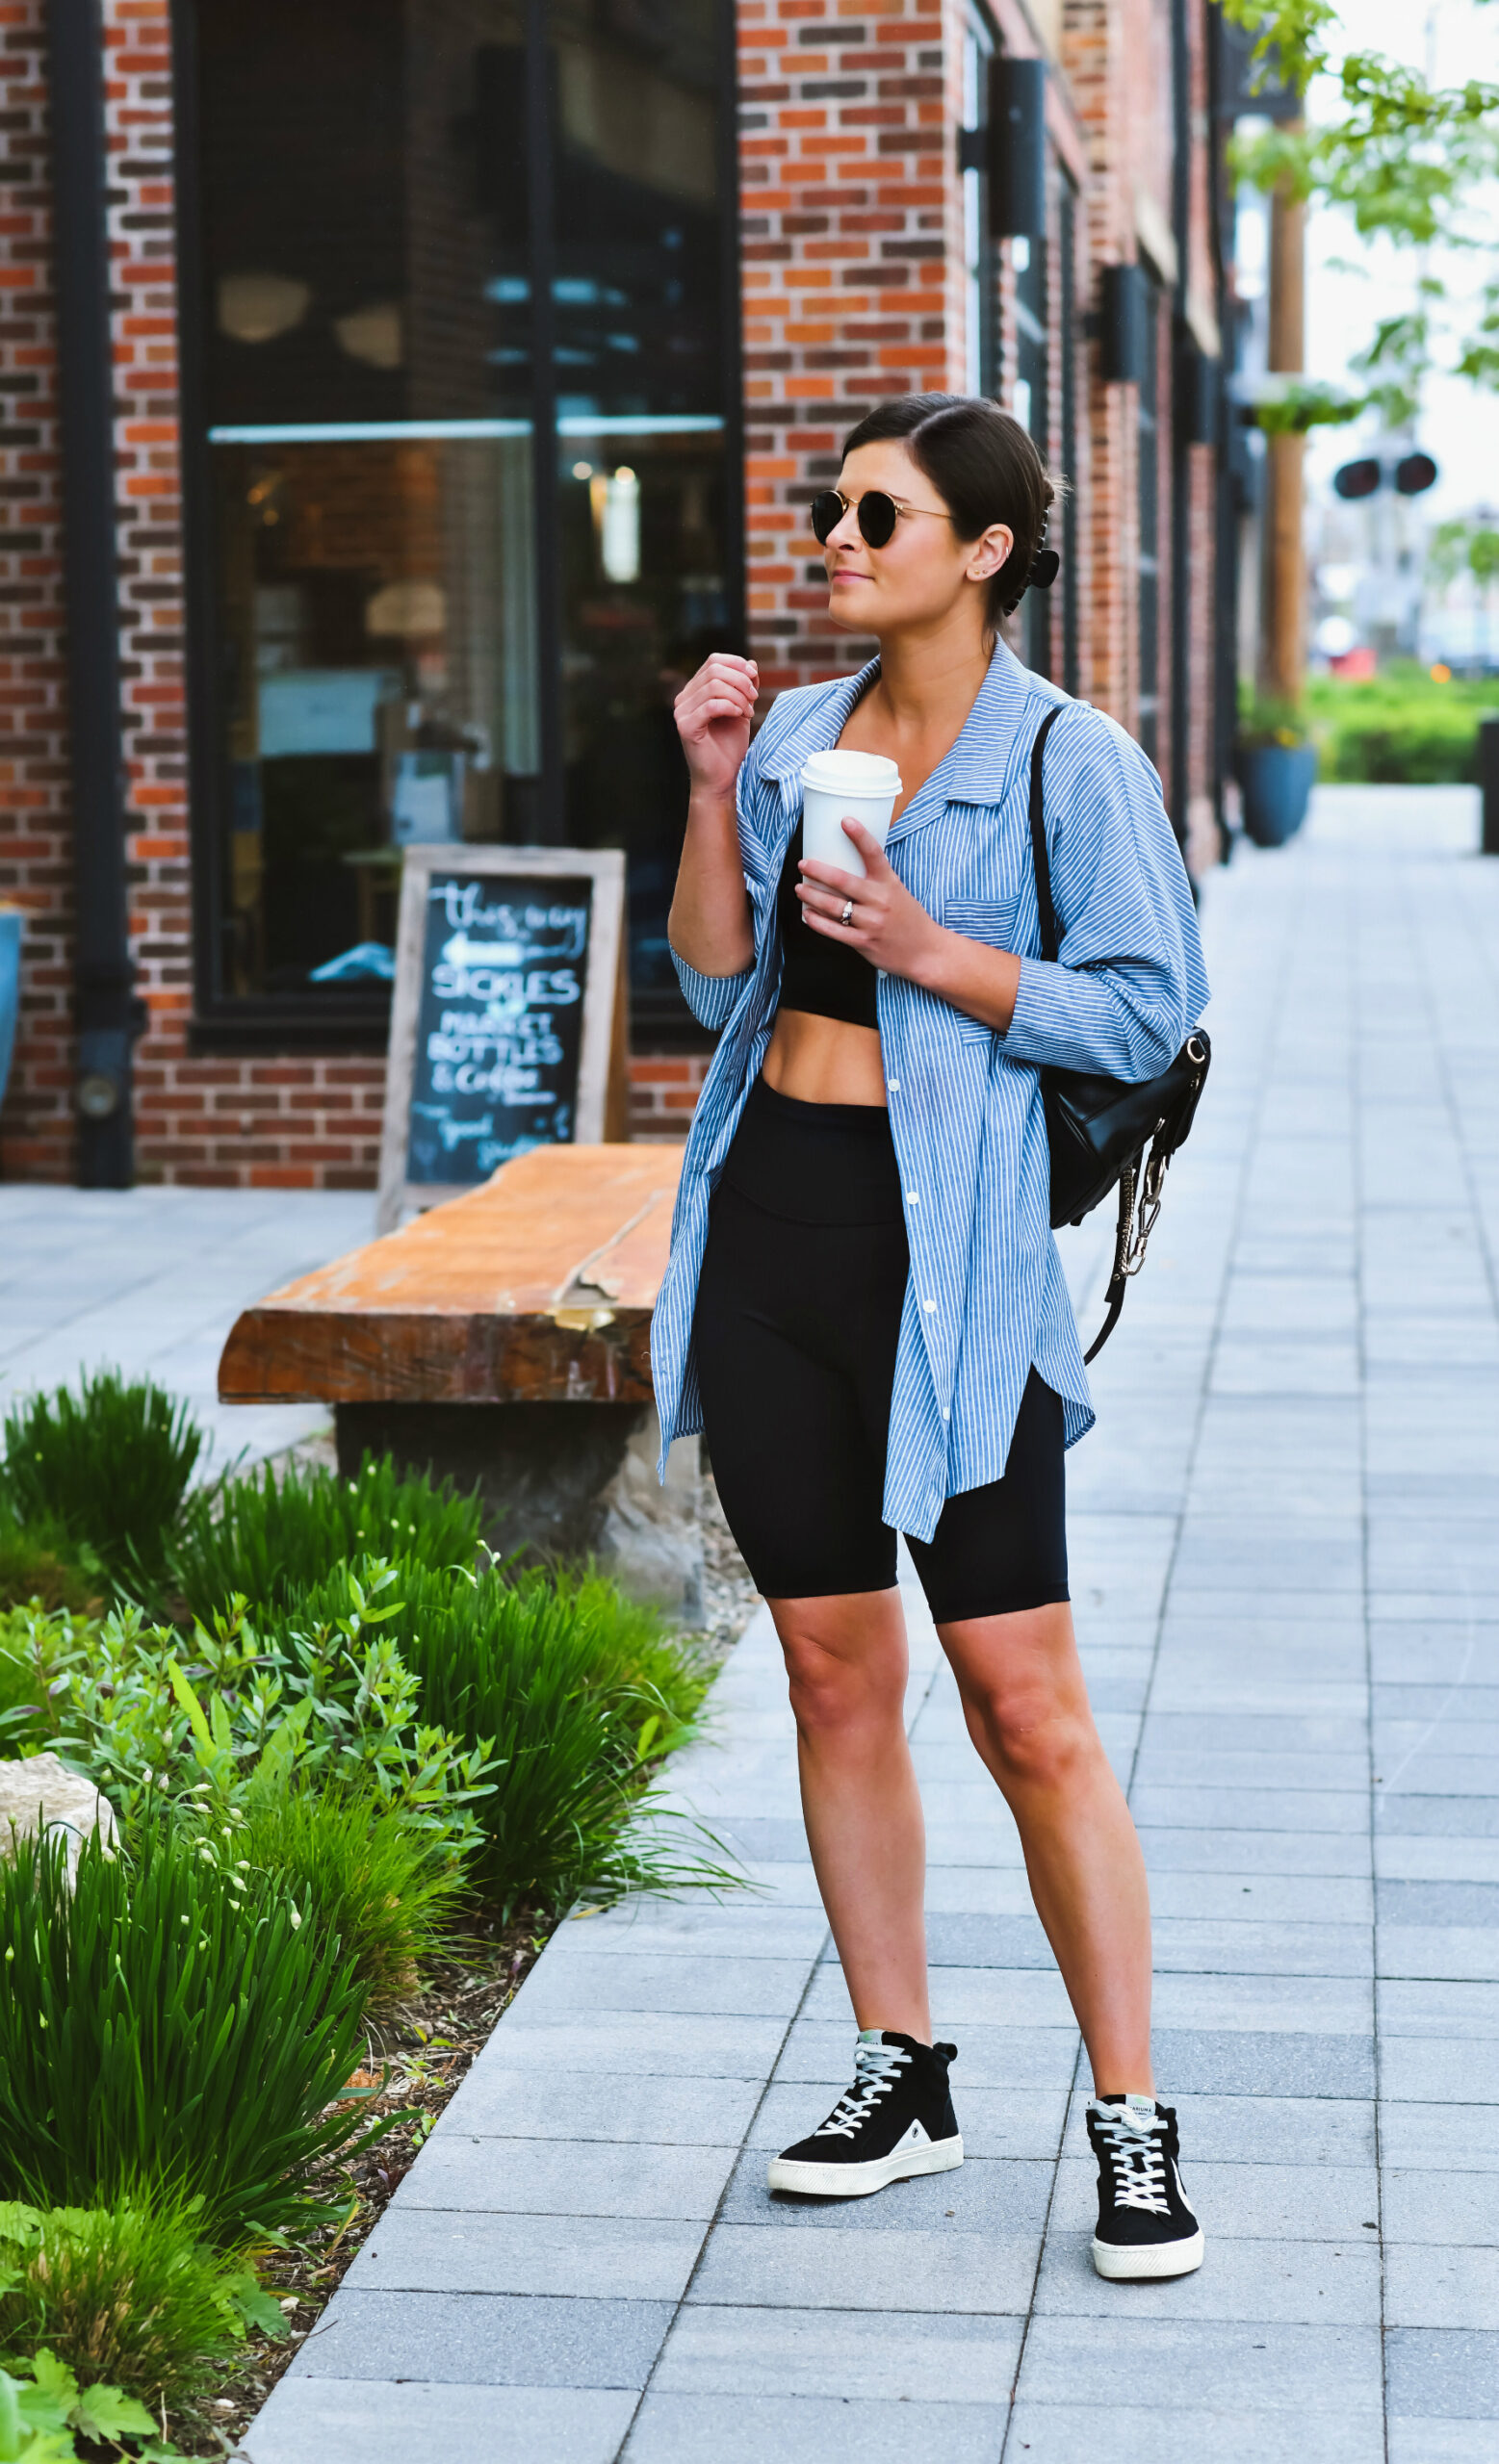 Long Biker Shorts Outfit, Oversized Button Down with Biker Shorts, Cariuma High Top Sneakers, Tilden of To Be Bright